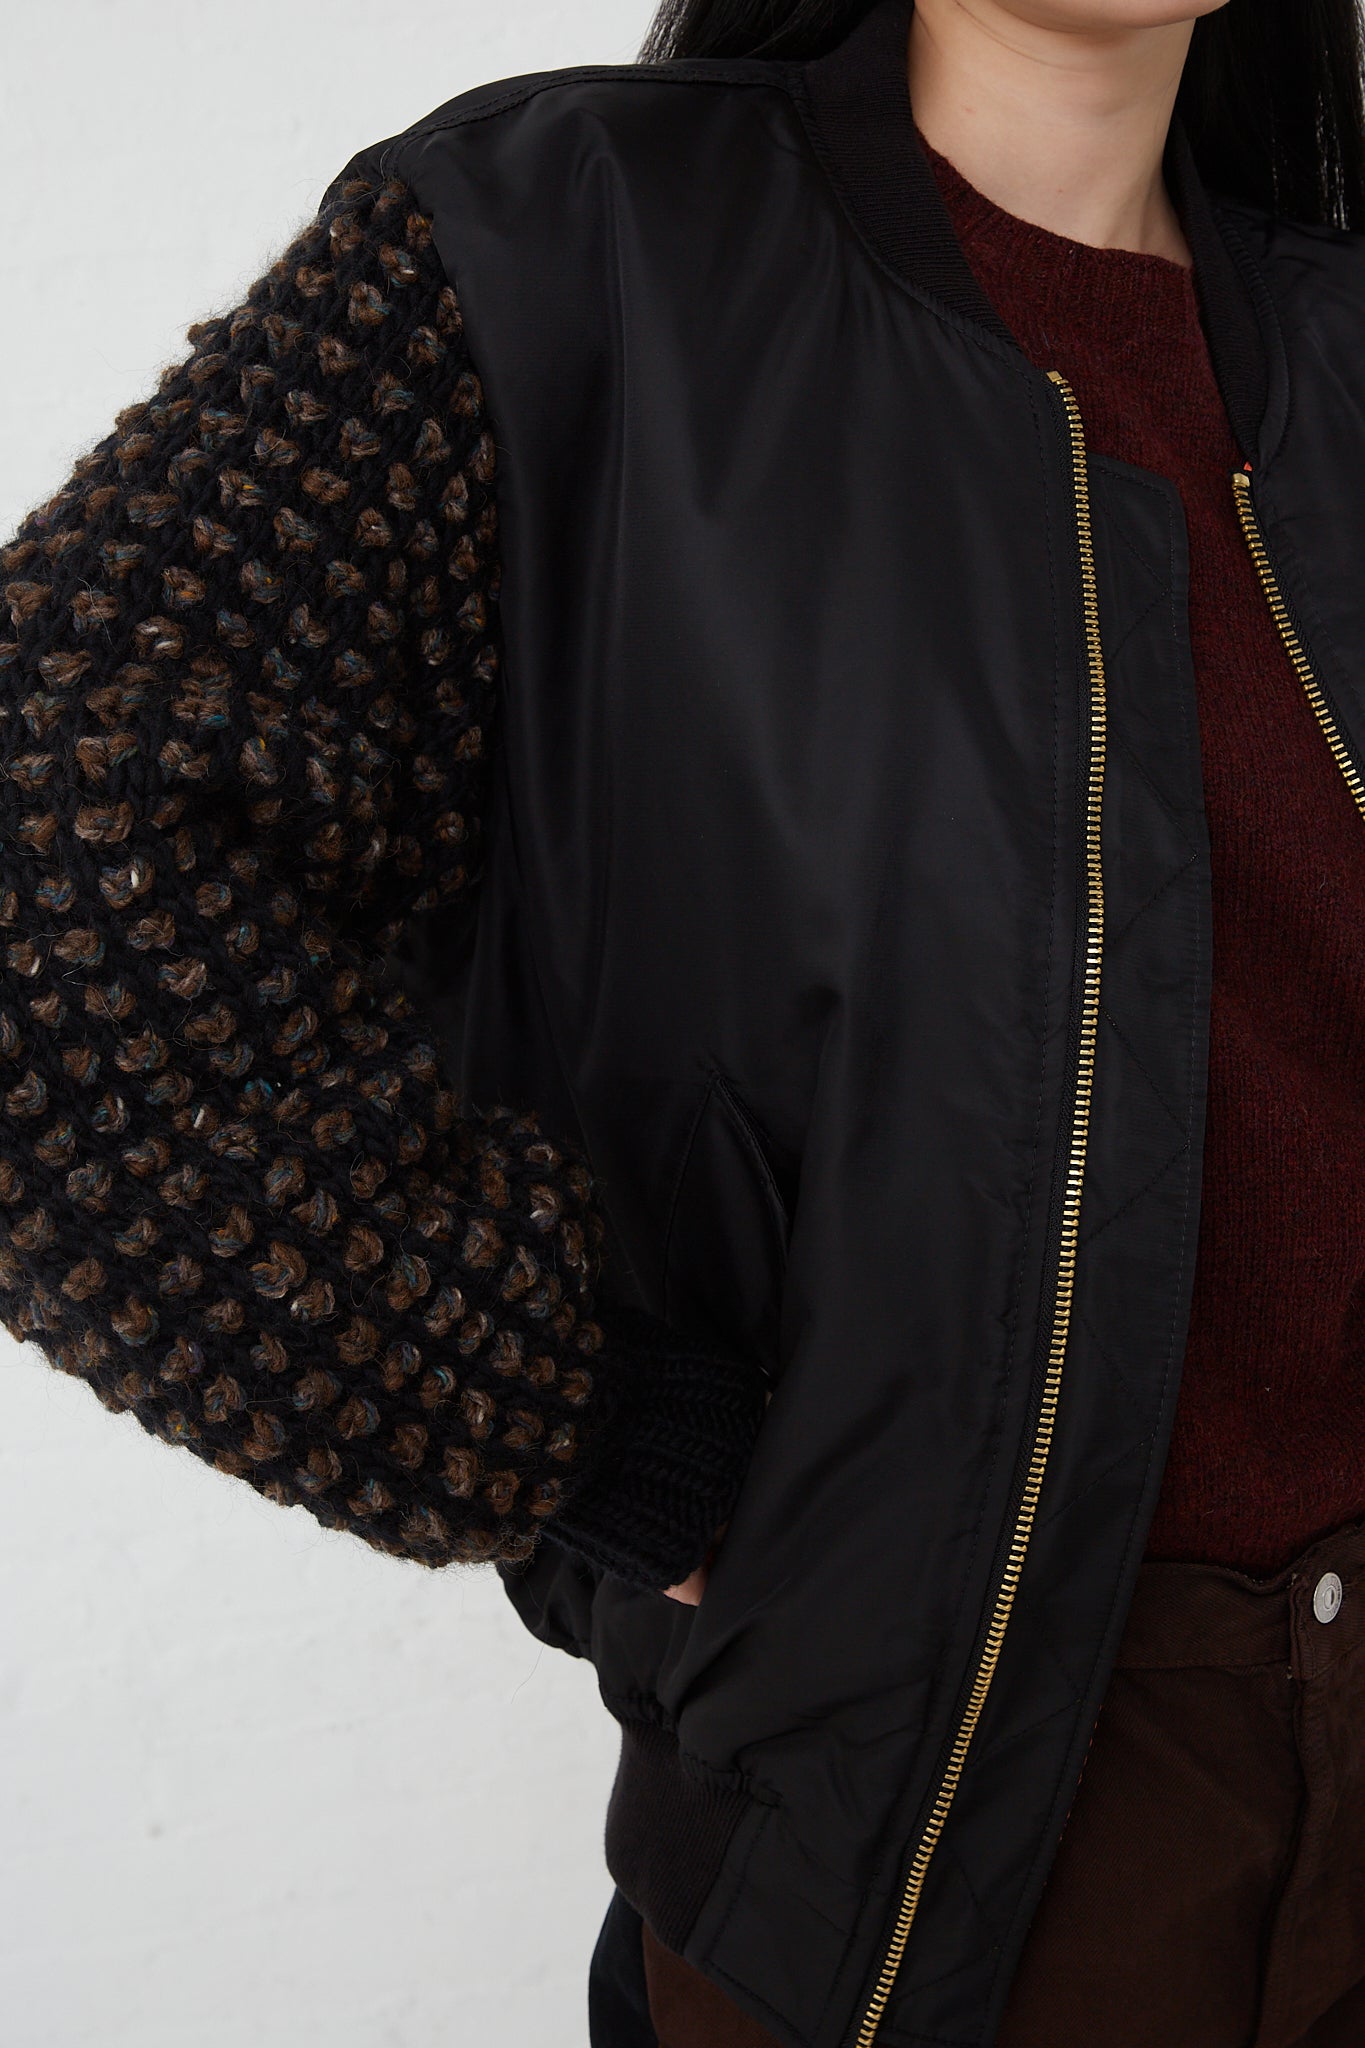 A woman with a Bless Sleeve Bomber No. 70 in Black, paired with brown pants.